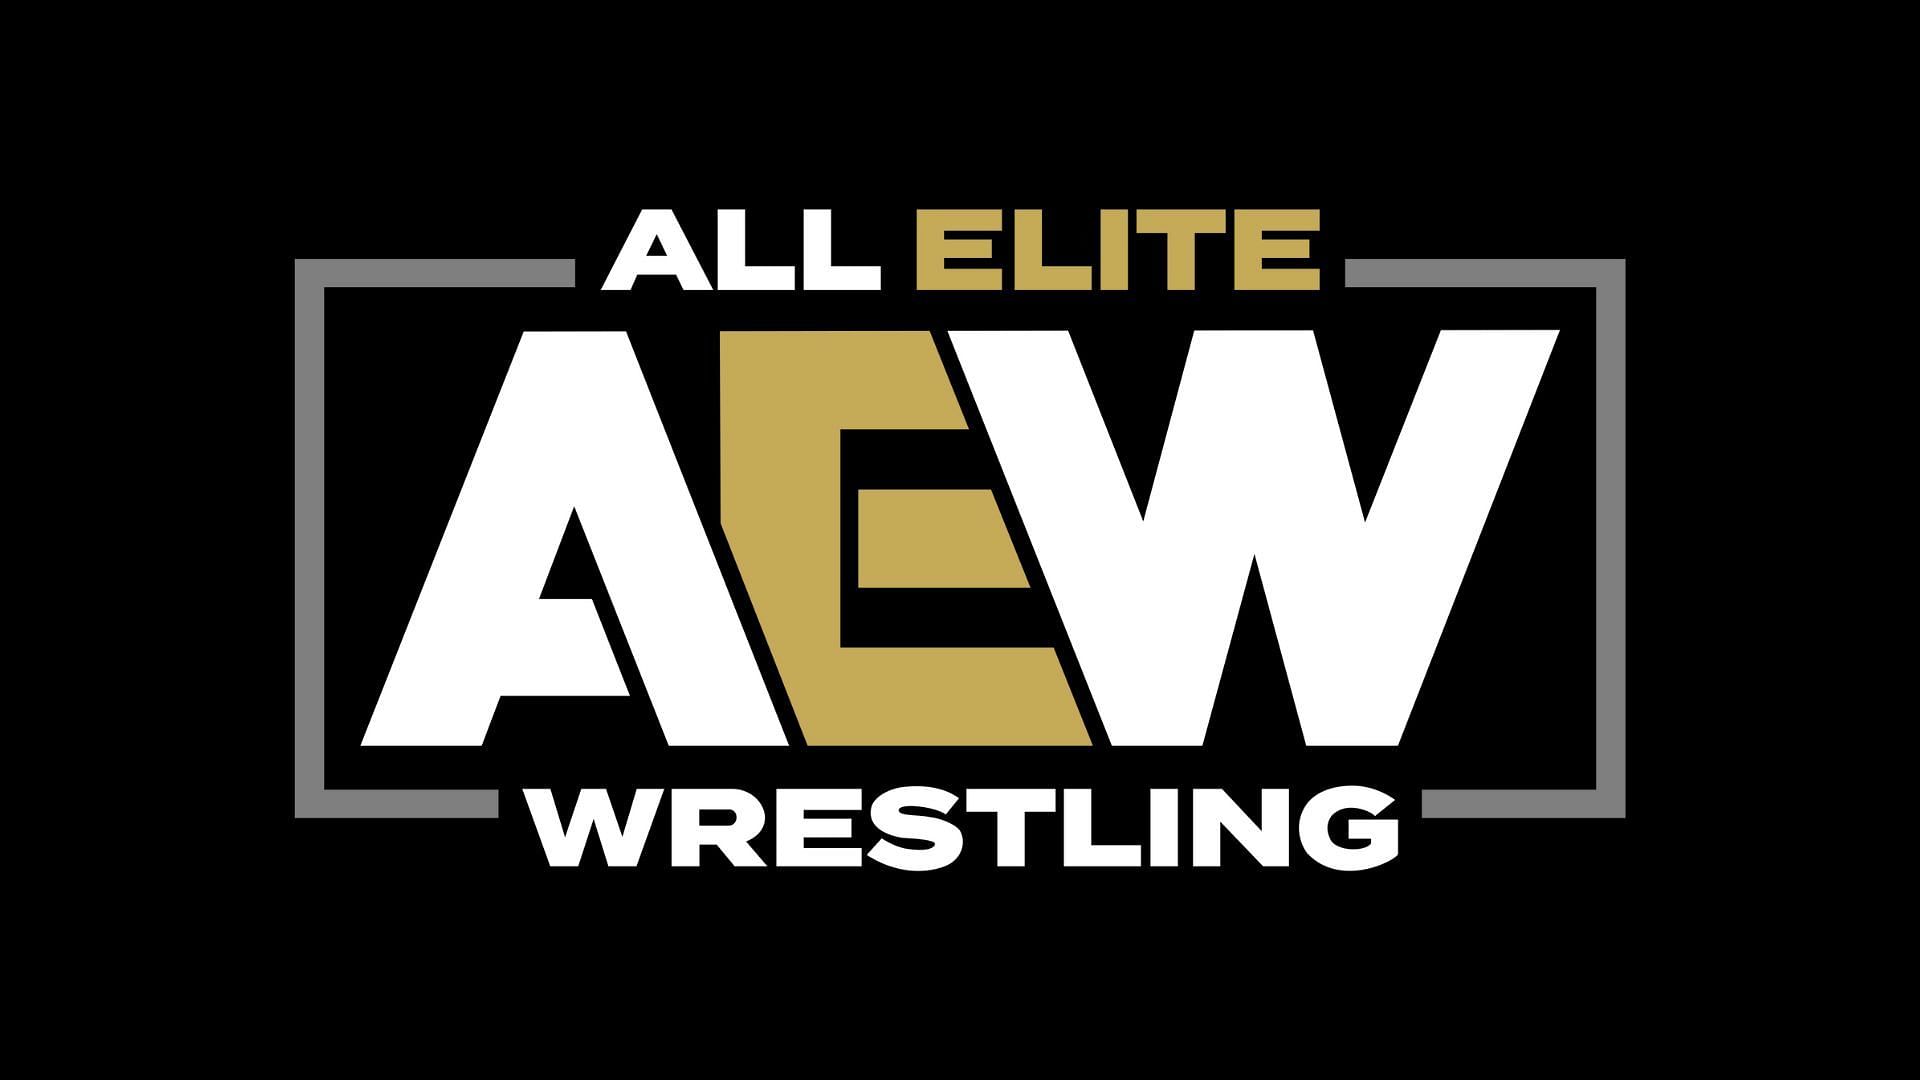 All Elite Wrestling (AEW) launched in 2019